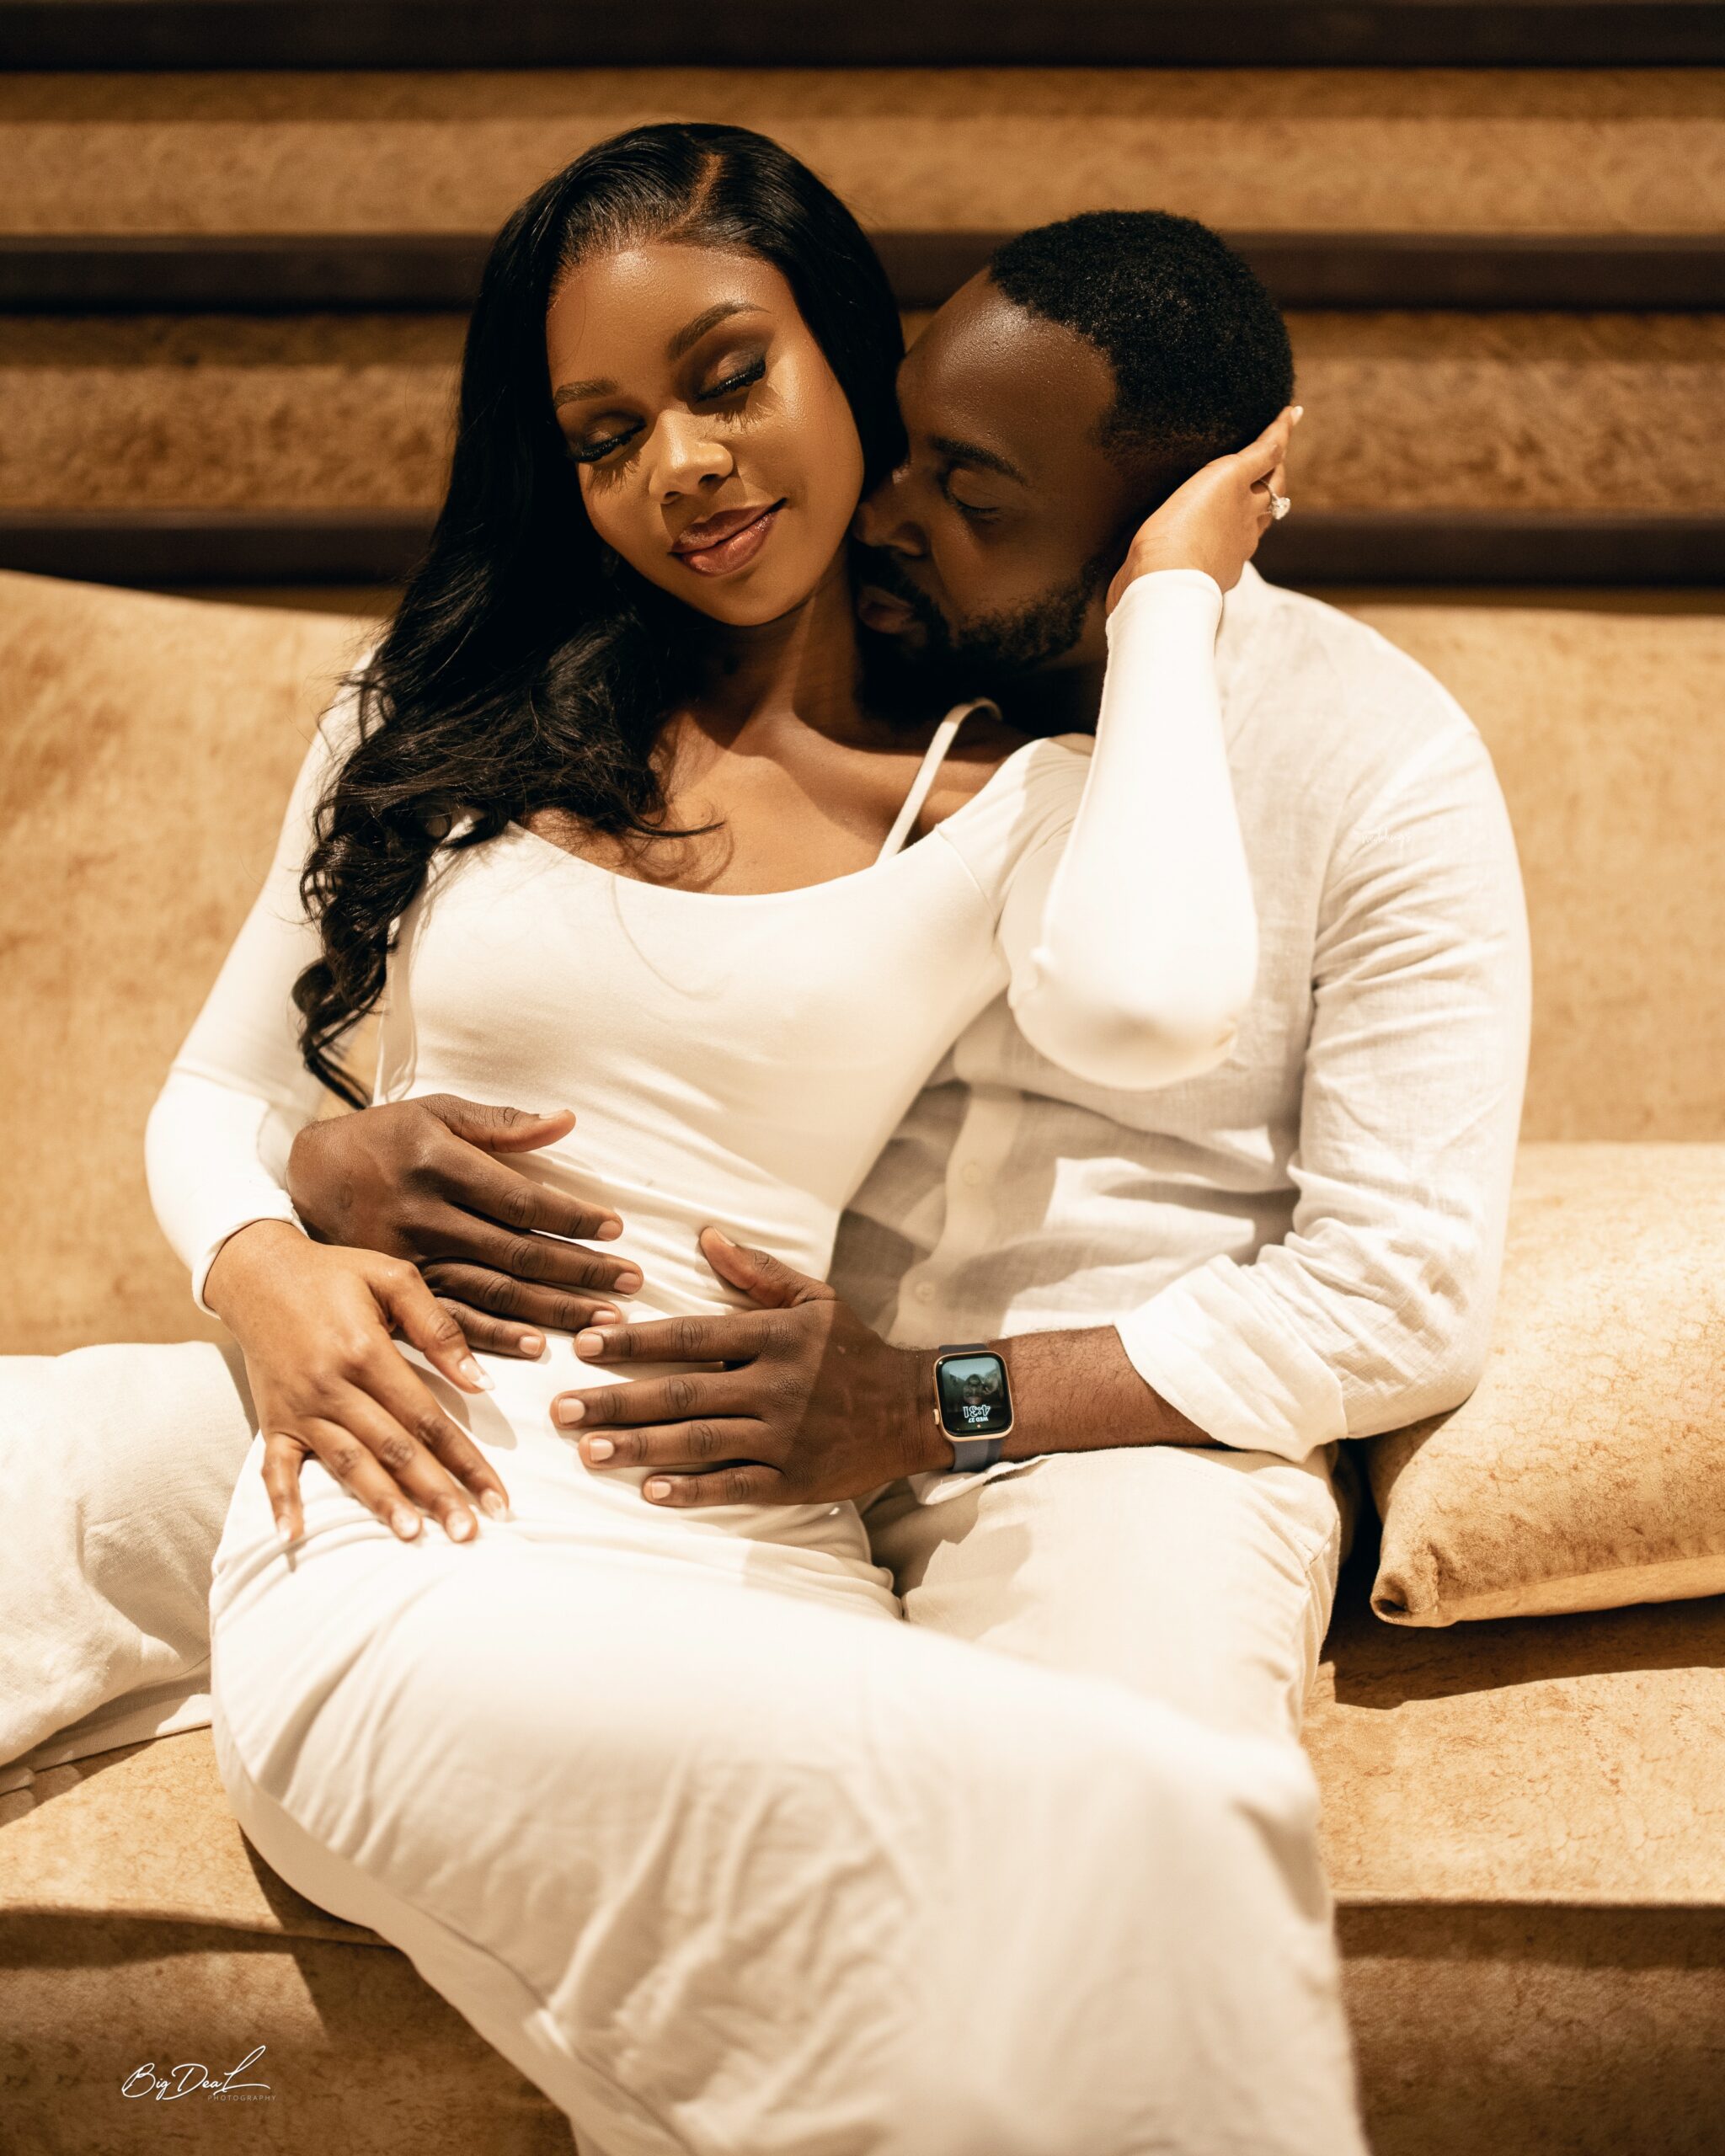 Stephanie & Sylvester’s Pre-wedding Shoot Is All Shades of Stunning! Really feel The Magic